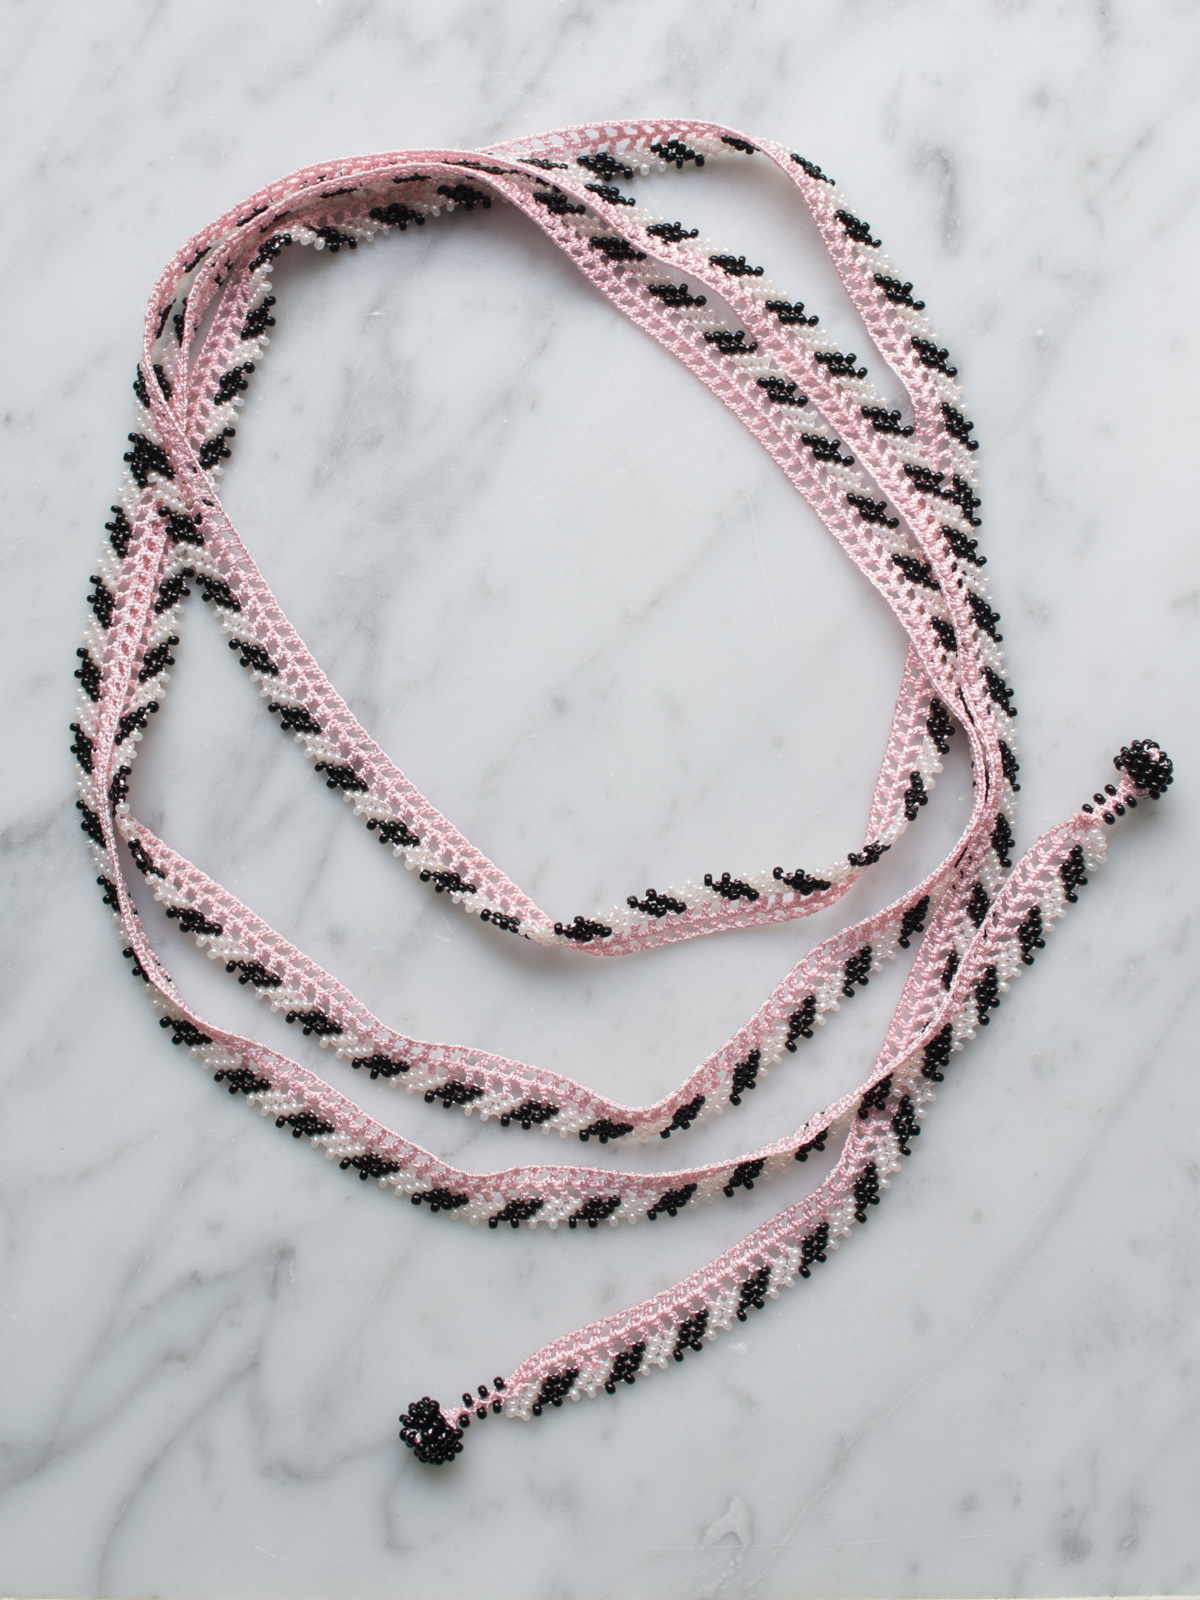 crocheted necklace Long Wrap Stripes